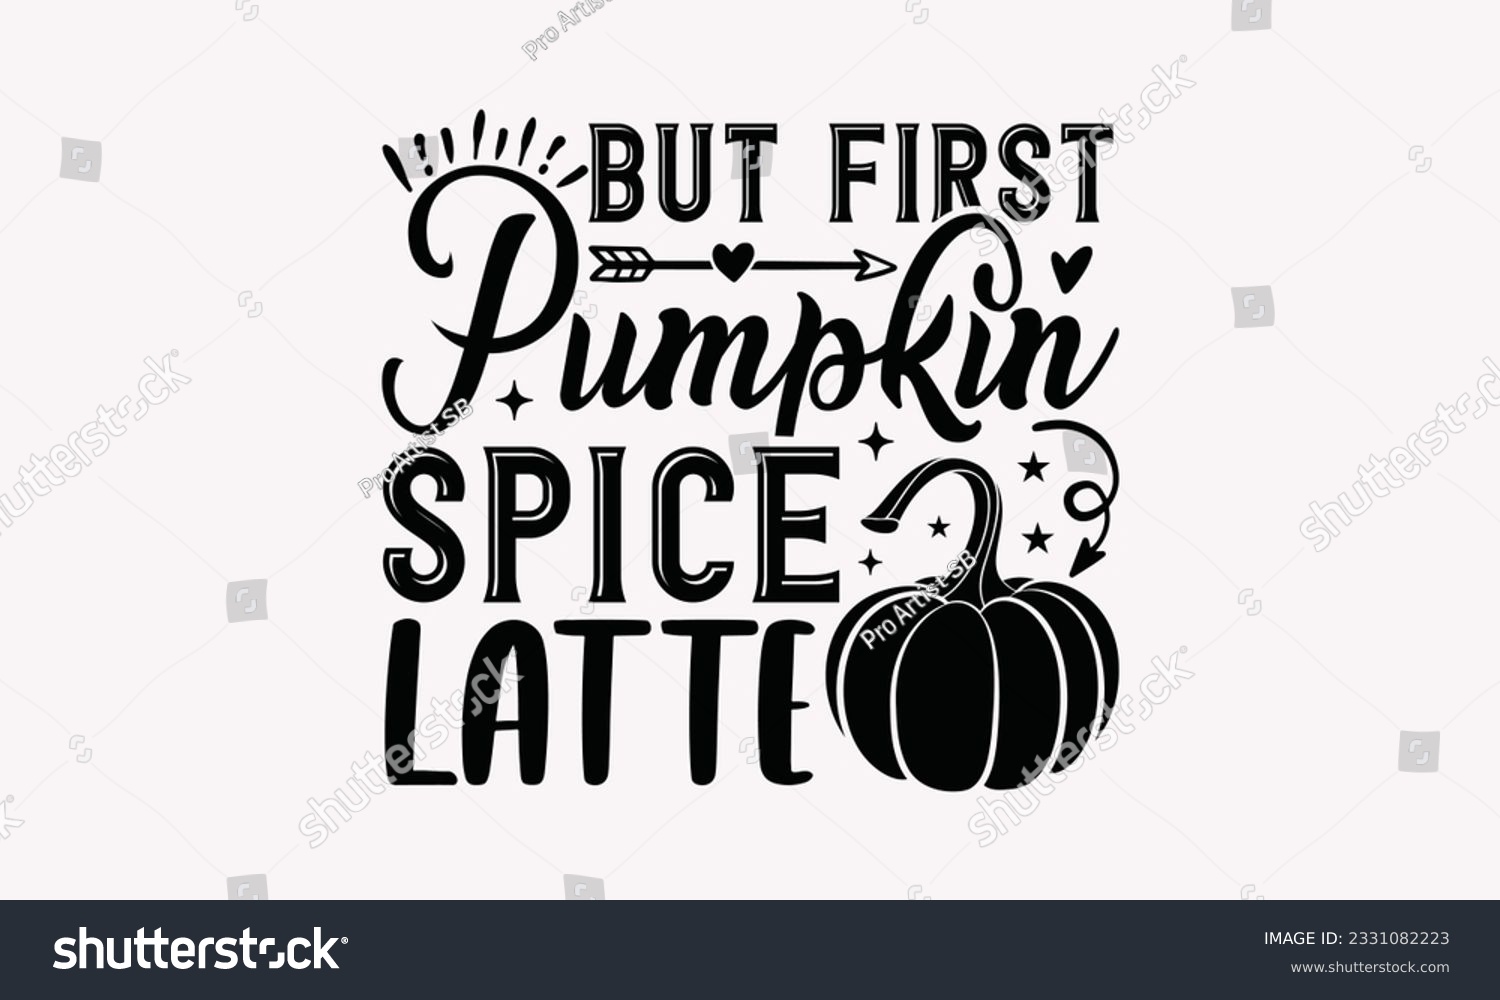 SVG of But first pumpkin spice latte - Coffee SVG Design Template, Drink Quotes, Calligraphy graphic design, Typography poster with old style camera and quote. svg